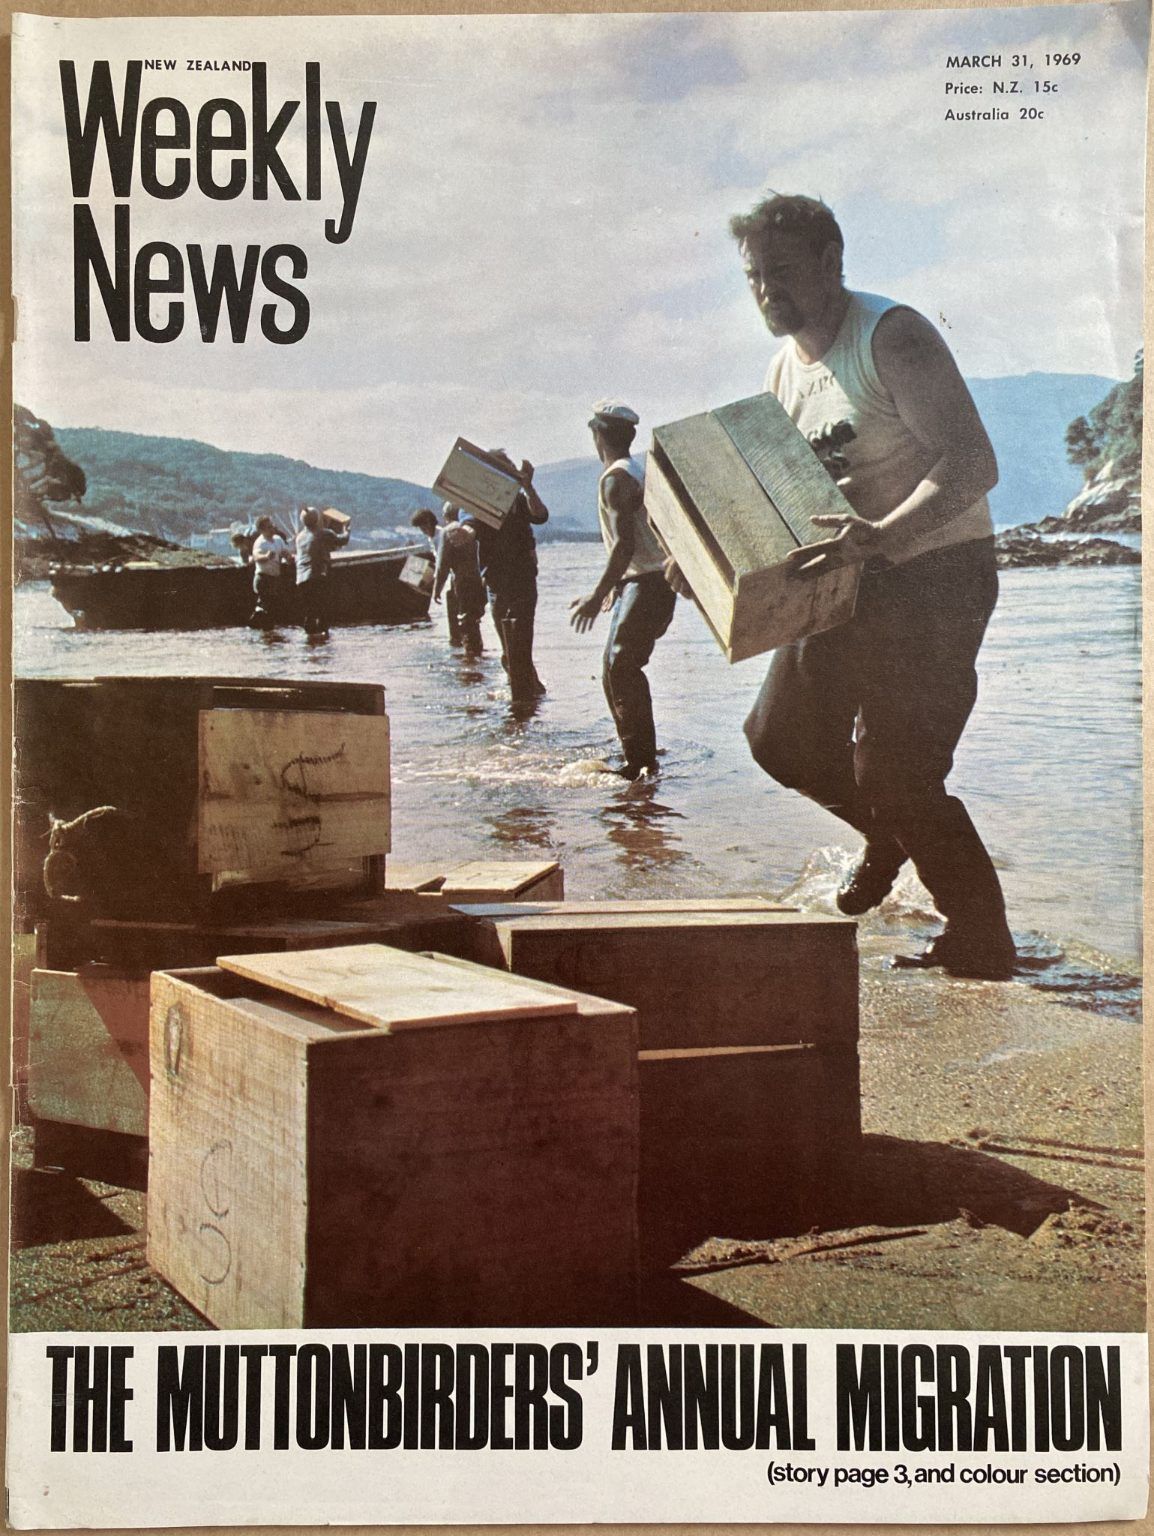 OLD NEWSPAPER: New Zealand Weekly News, No. 5496, 31 March 1969